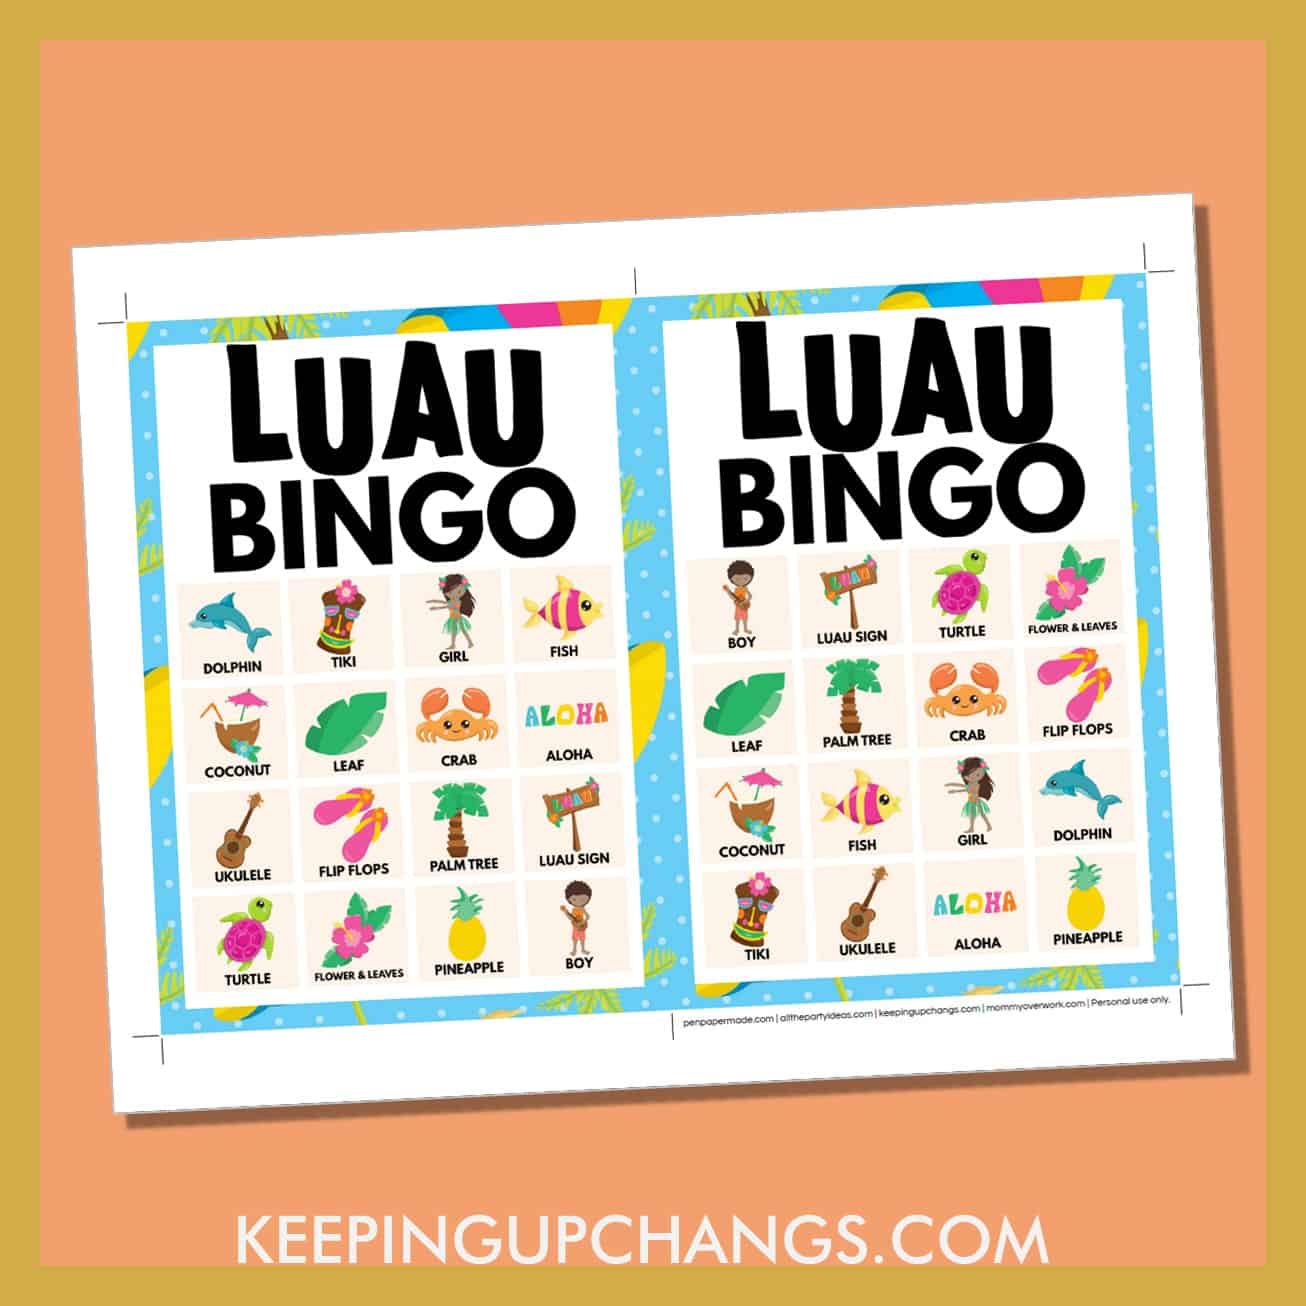 free hawaiian luau bingo card 4x4 5x7 game boards with images and text words.